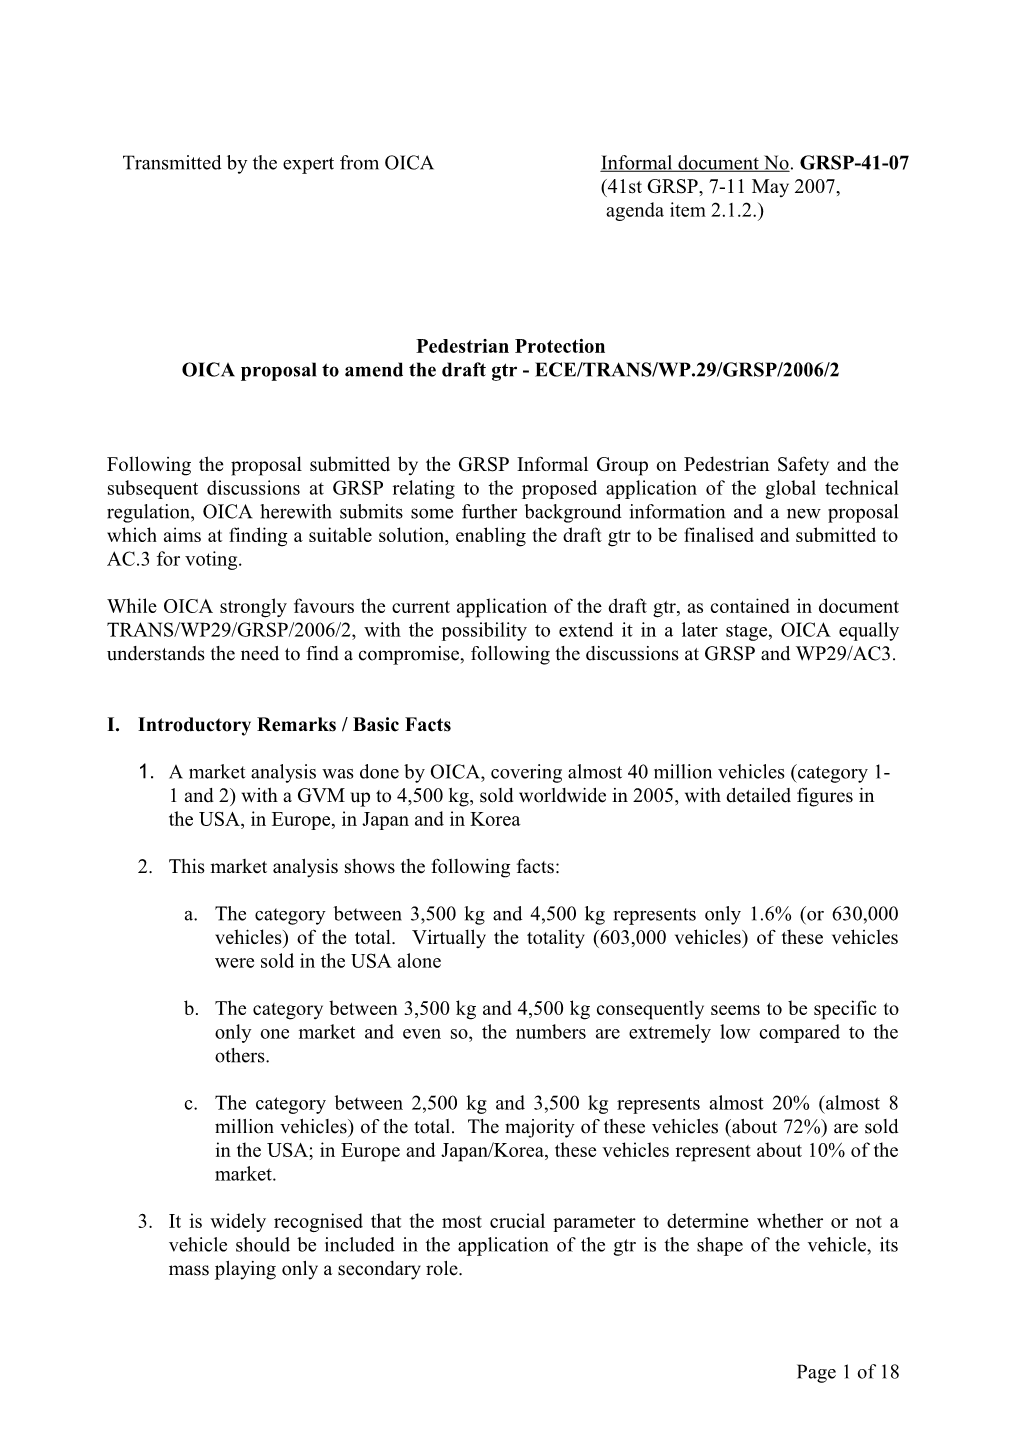 OICA Proposal to Amend the Draft Gtr - ECE/TRANS/WP.29/GRSP/2006/2